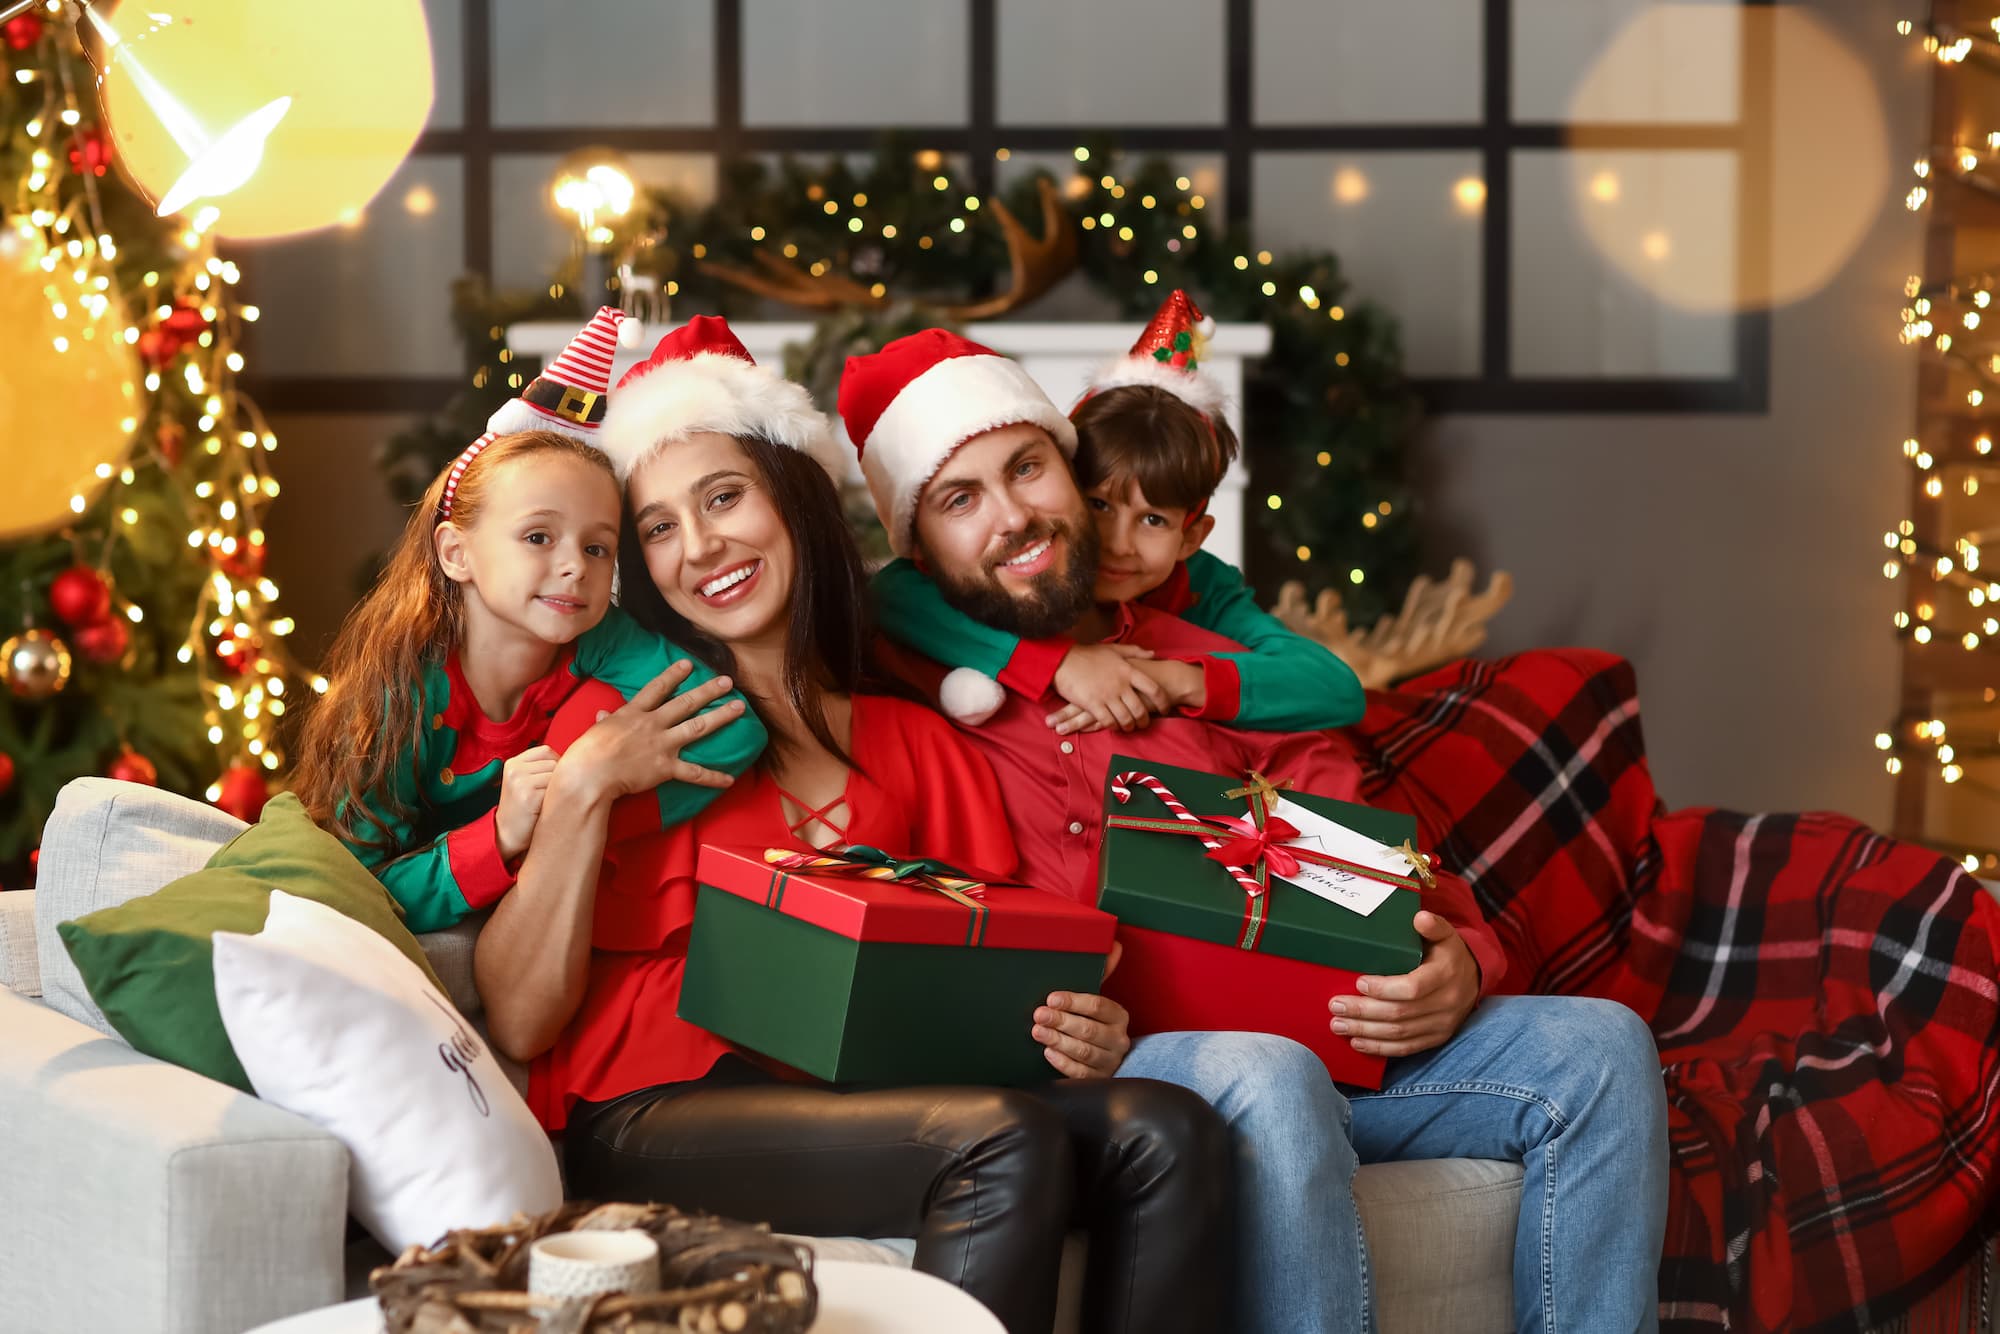 A family sits together on a sofa, smiling for a Christmas portrait.